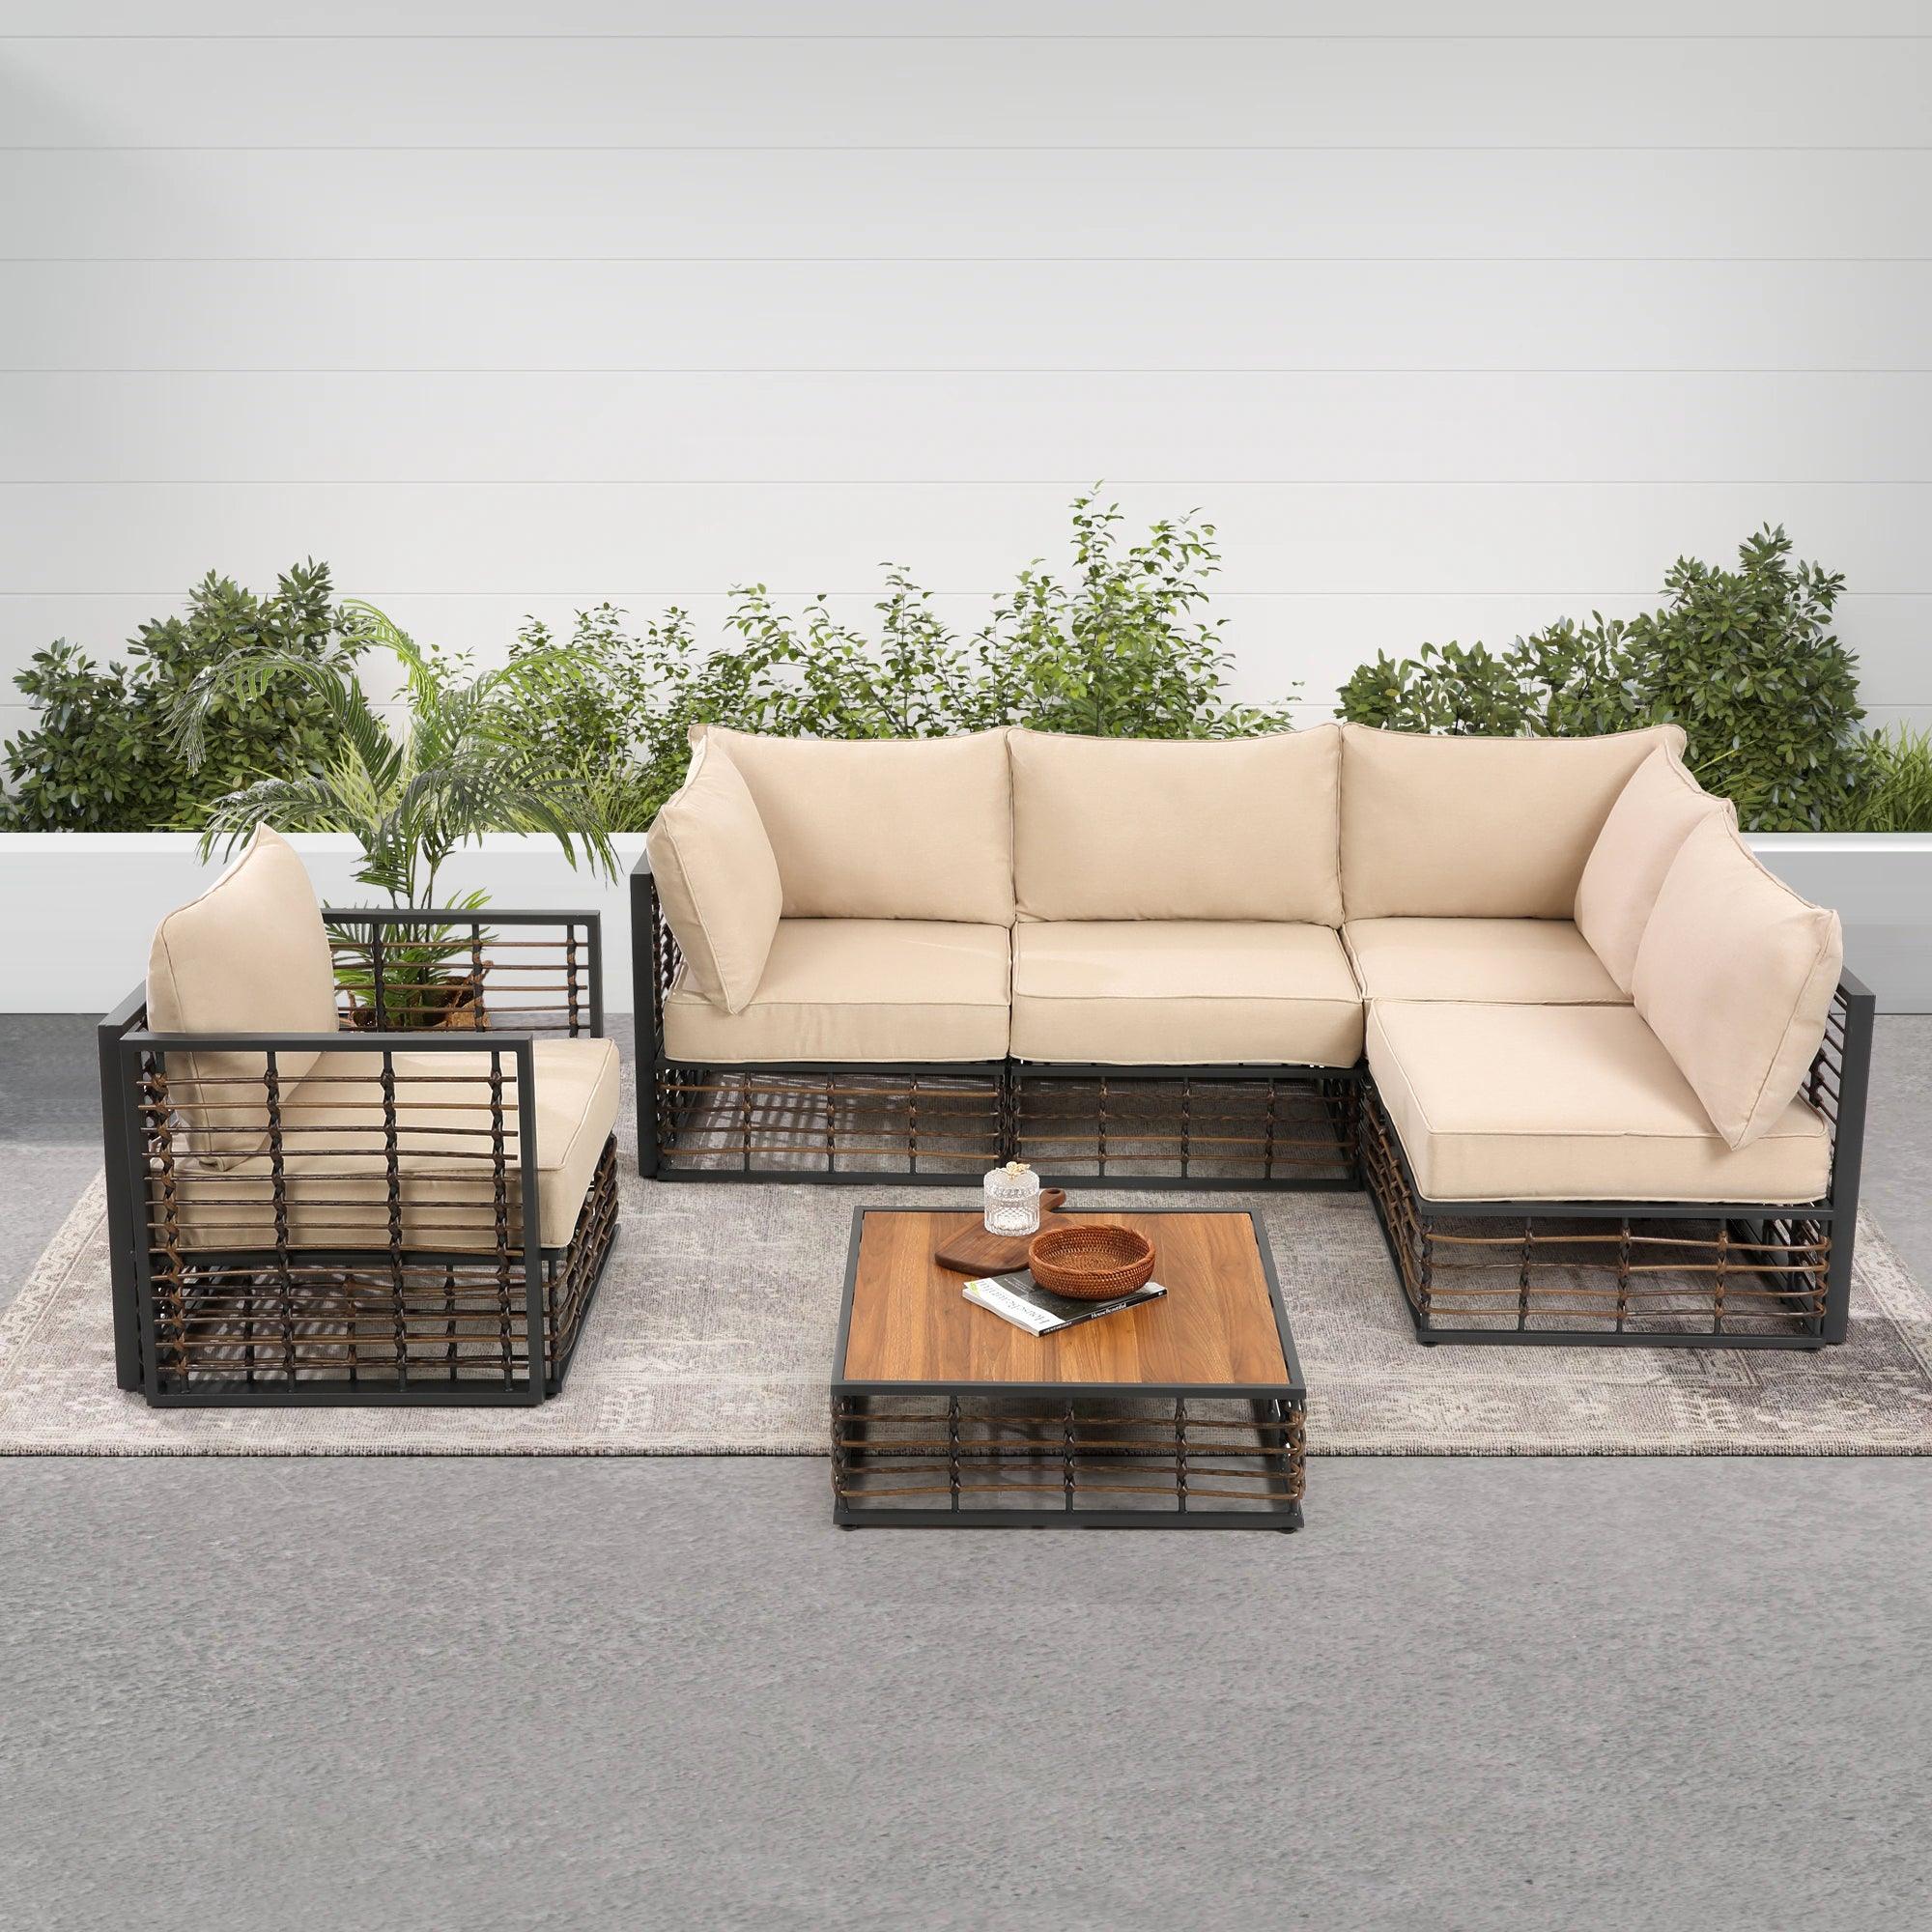 🆓🚛 Grand patio 6-Piece Wicker Patio Furniture Set, All-Weather Outdoor Conversation Set Sectional Sofa with Water Resistant Beige Thick Cushions & Coffee Table